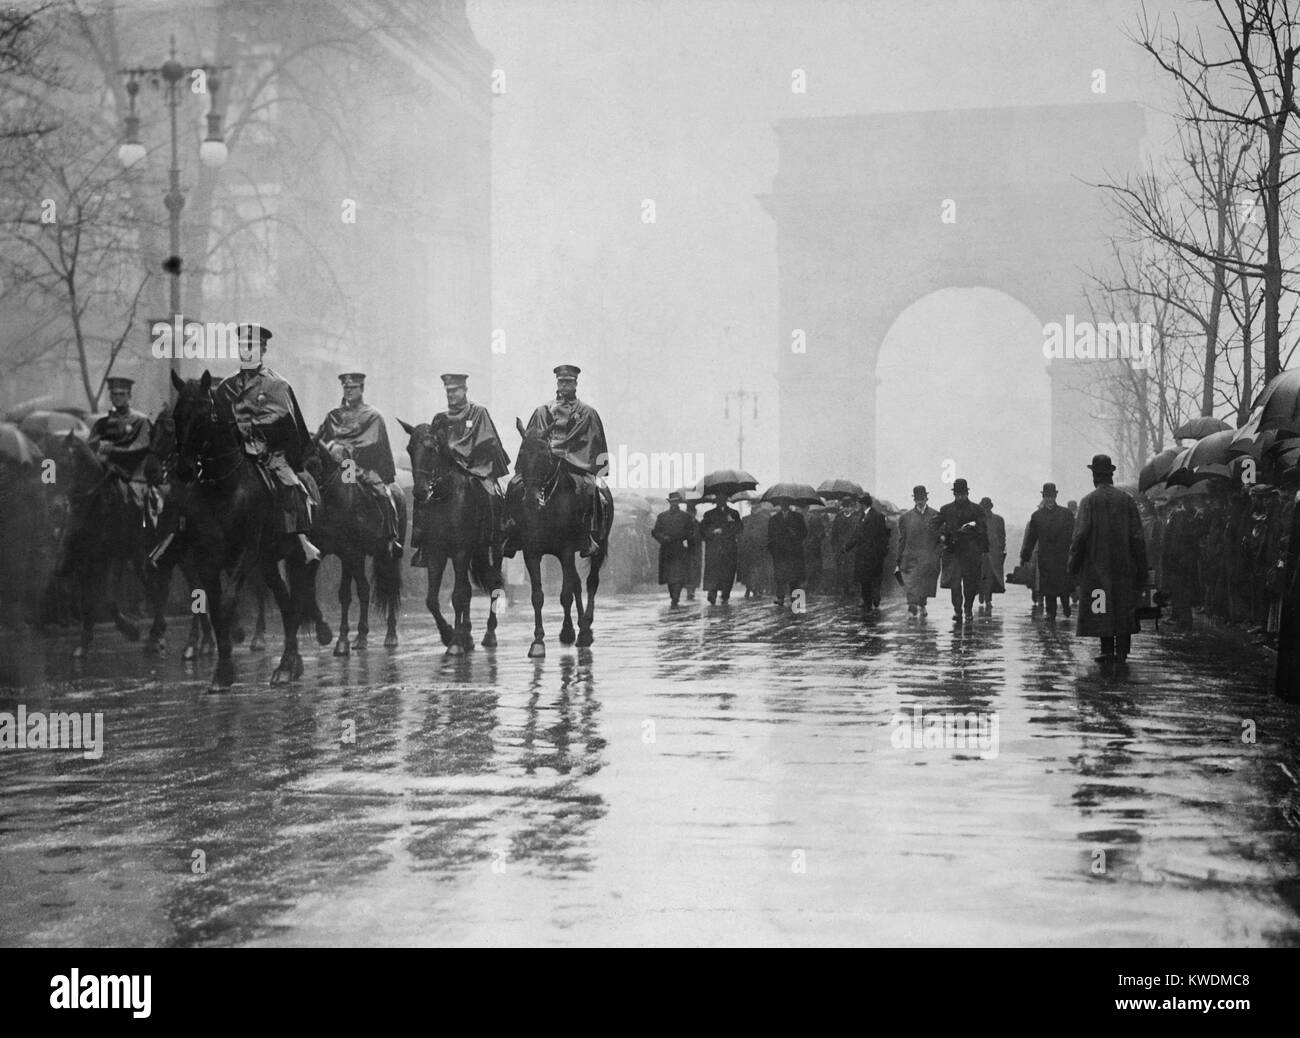 Trade Union procession for 145 Triangle Waist Co. fire victims. Men on horseback lead others in the rain on Fifth Avenue with the Washington Square in the background. Union activism prompted the Fire Department to improve building inspections and enforce fire codes (BSLOC 2017 17 103) Stock Photo